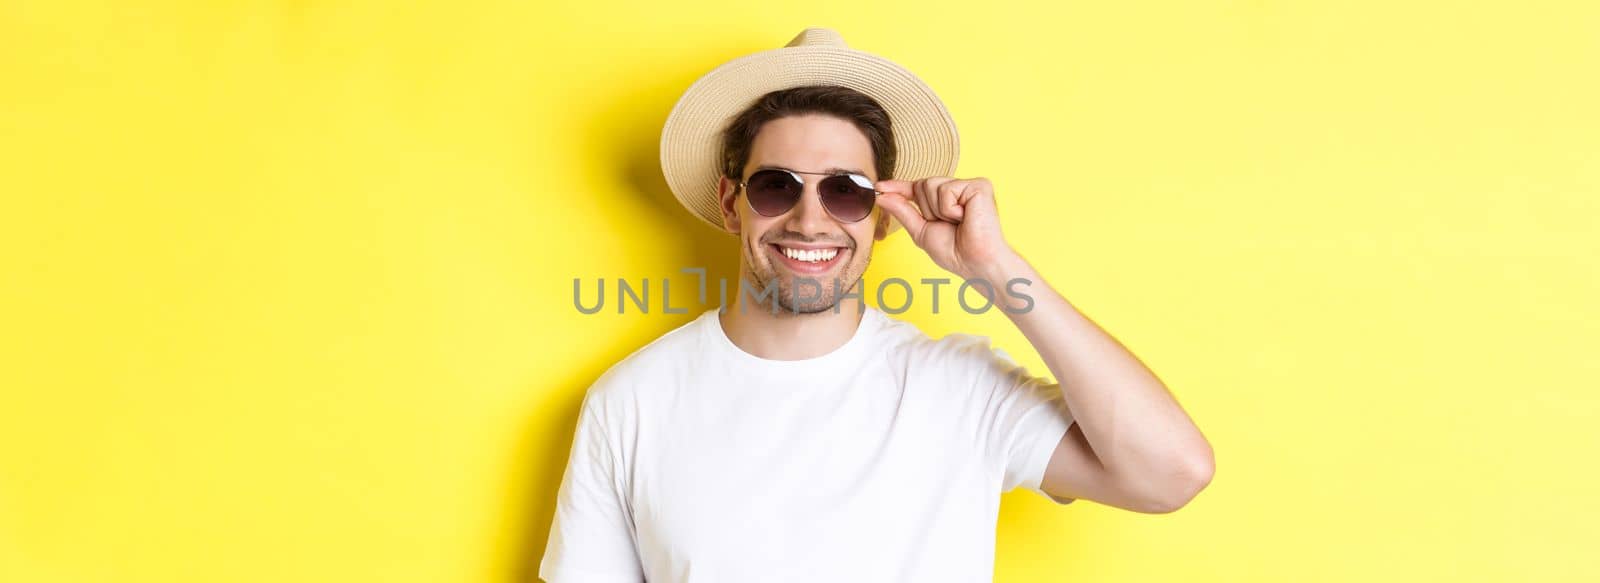 Concept of tourism and vacation. Close-up of handsome man tourist looking happy, wearing sunglasses and summer hat, standing over yellow background.